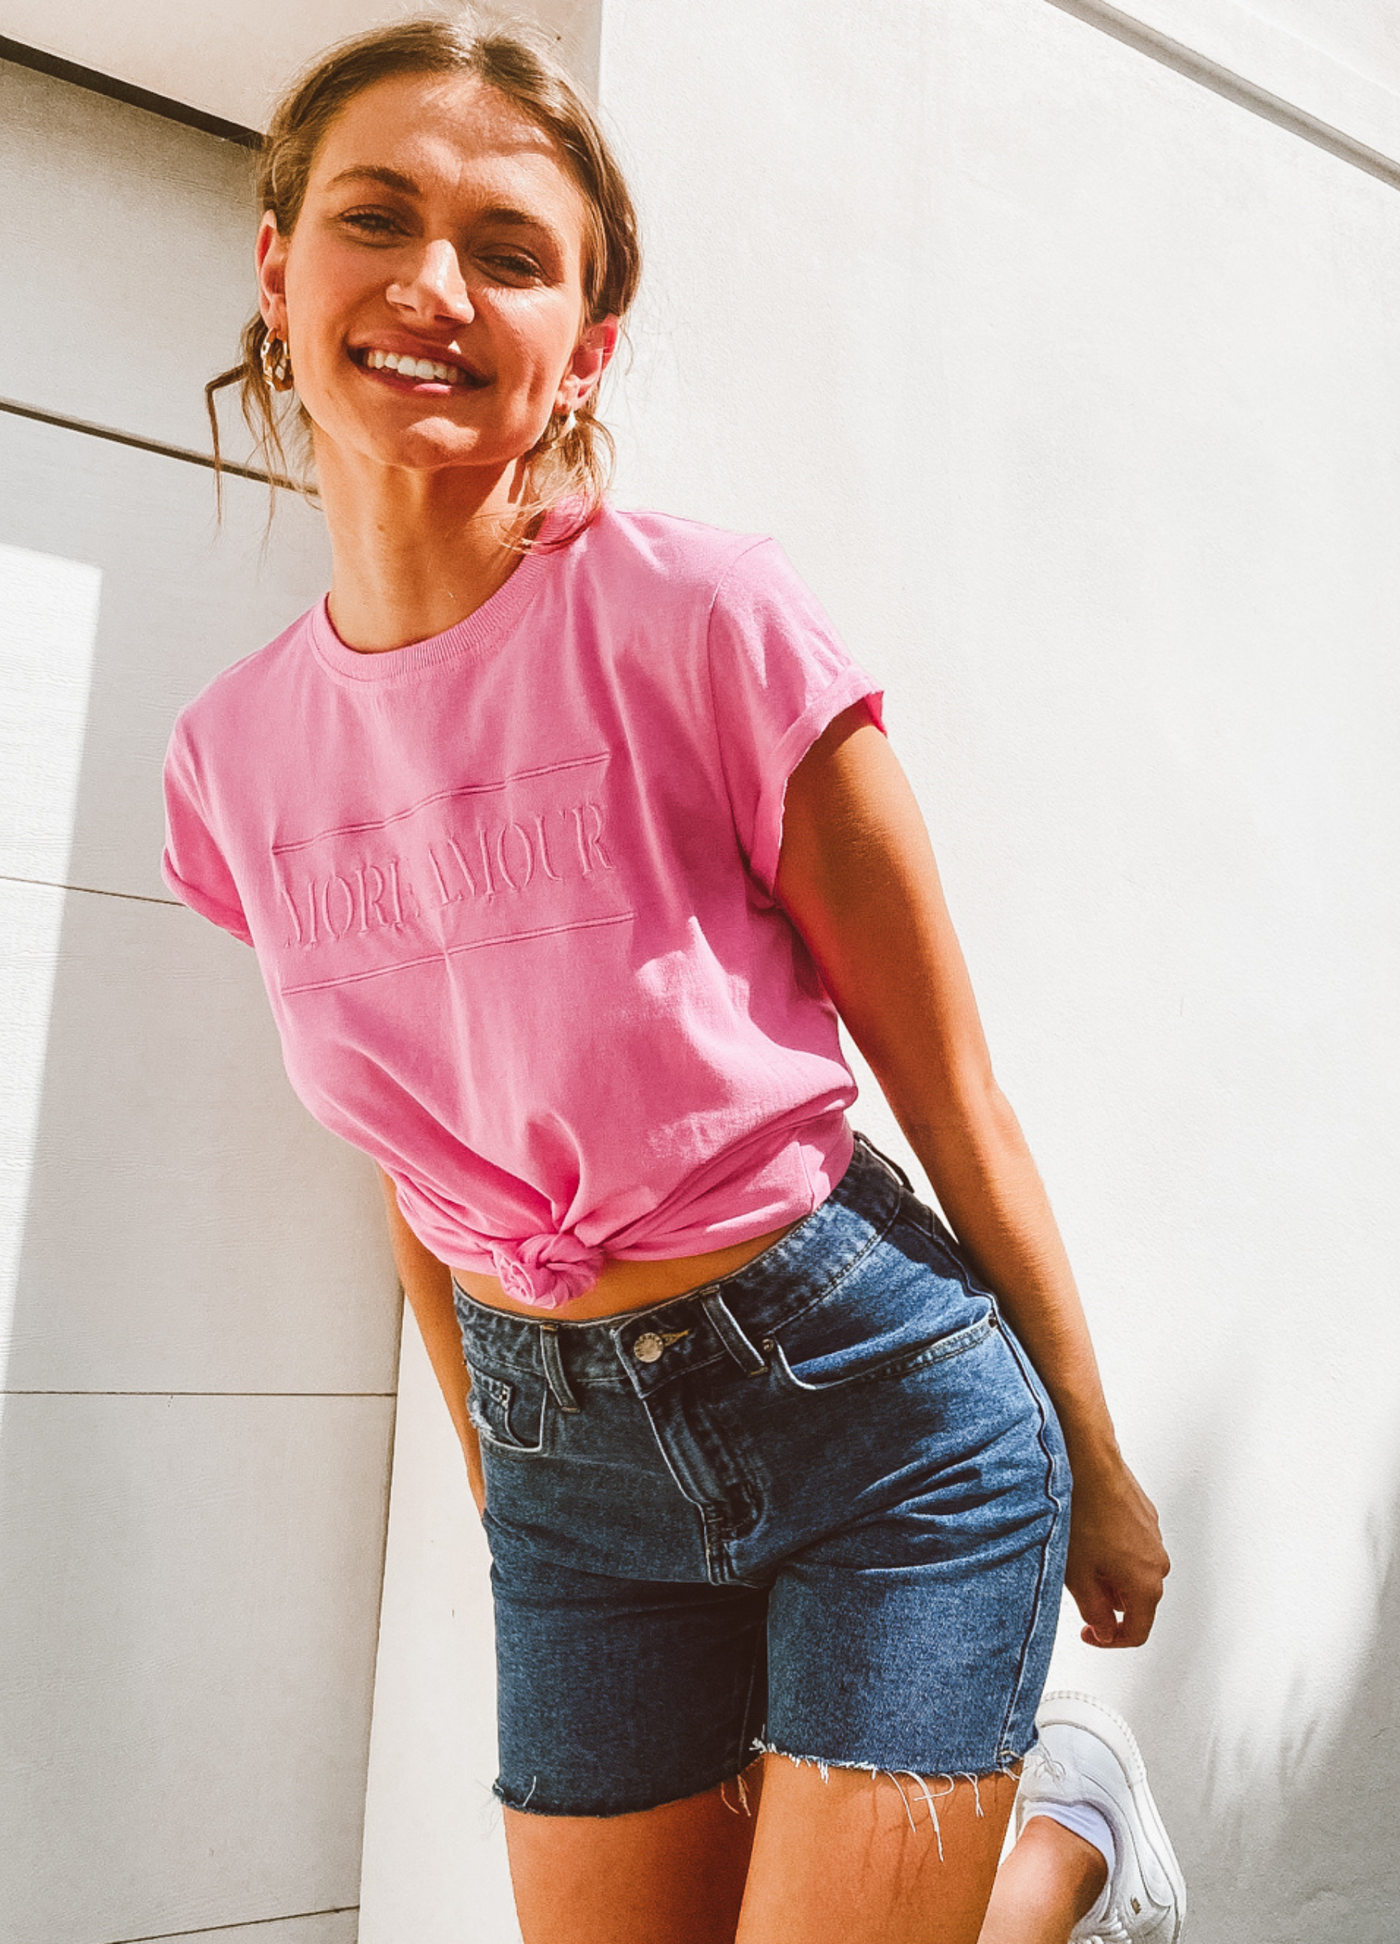 Women smiling and wearing a pink tshirt and denim cut off shorts